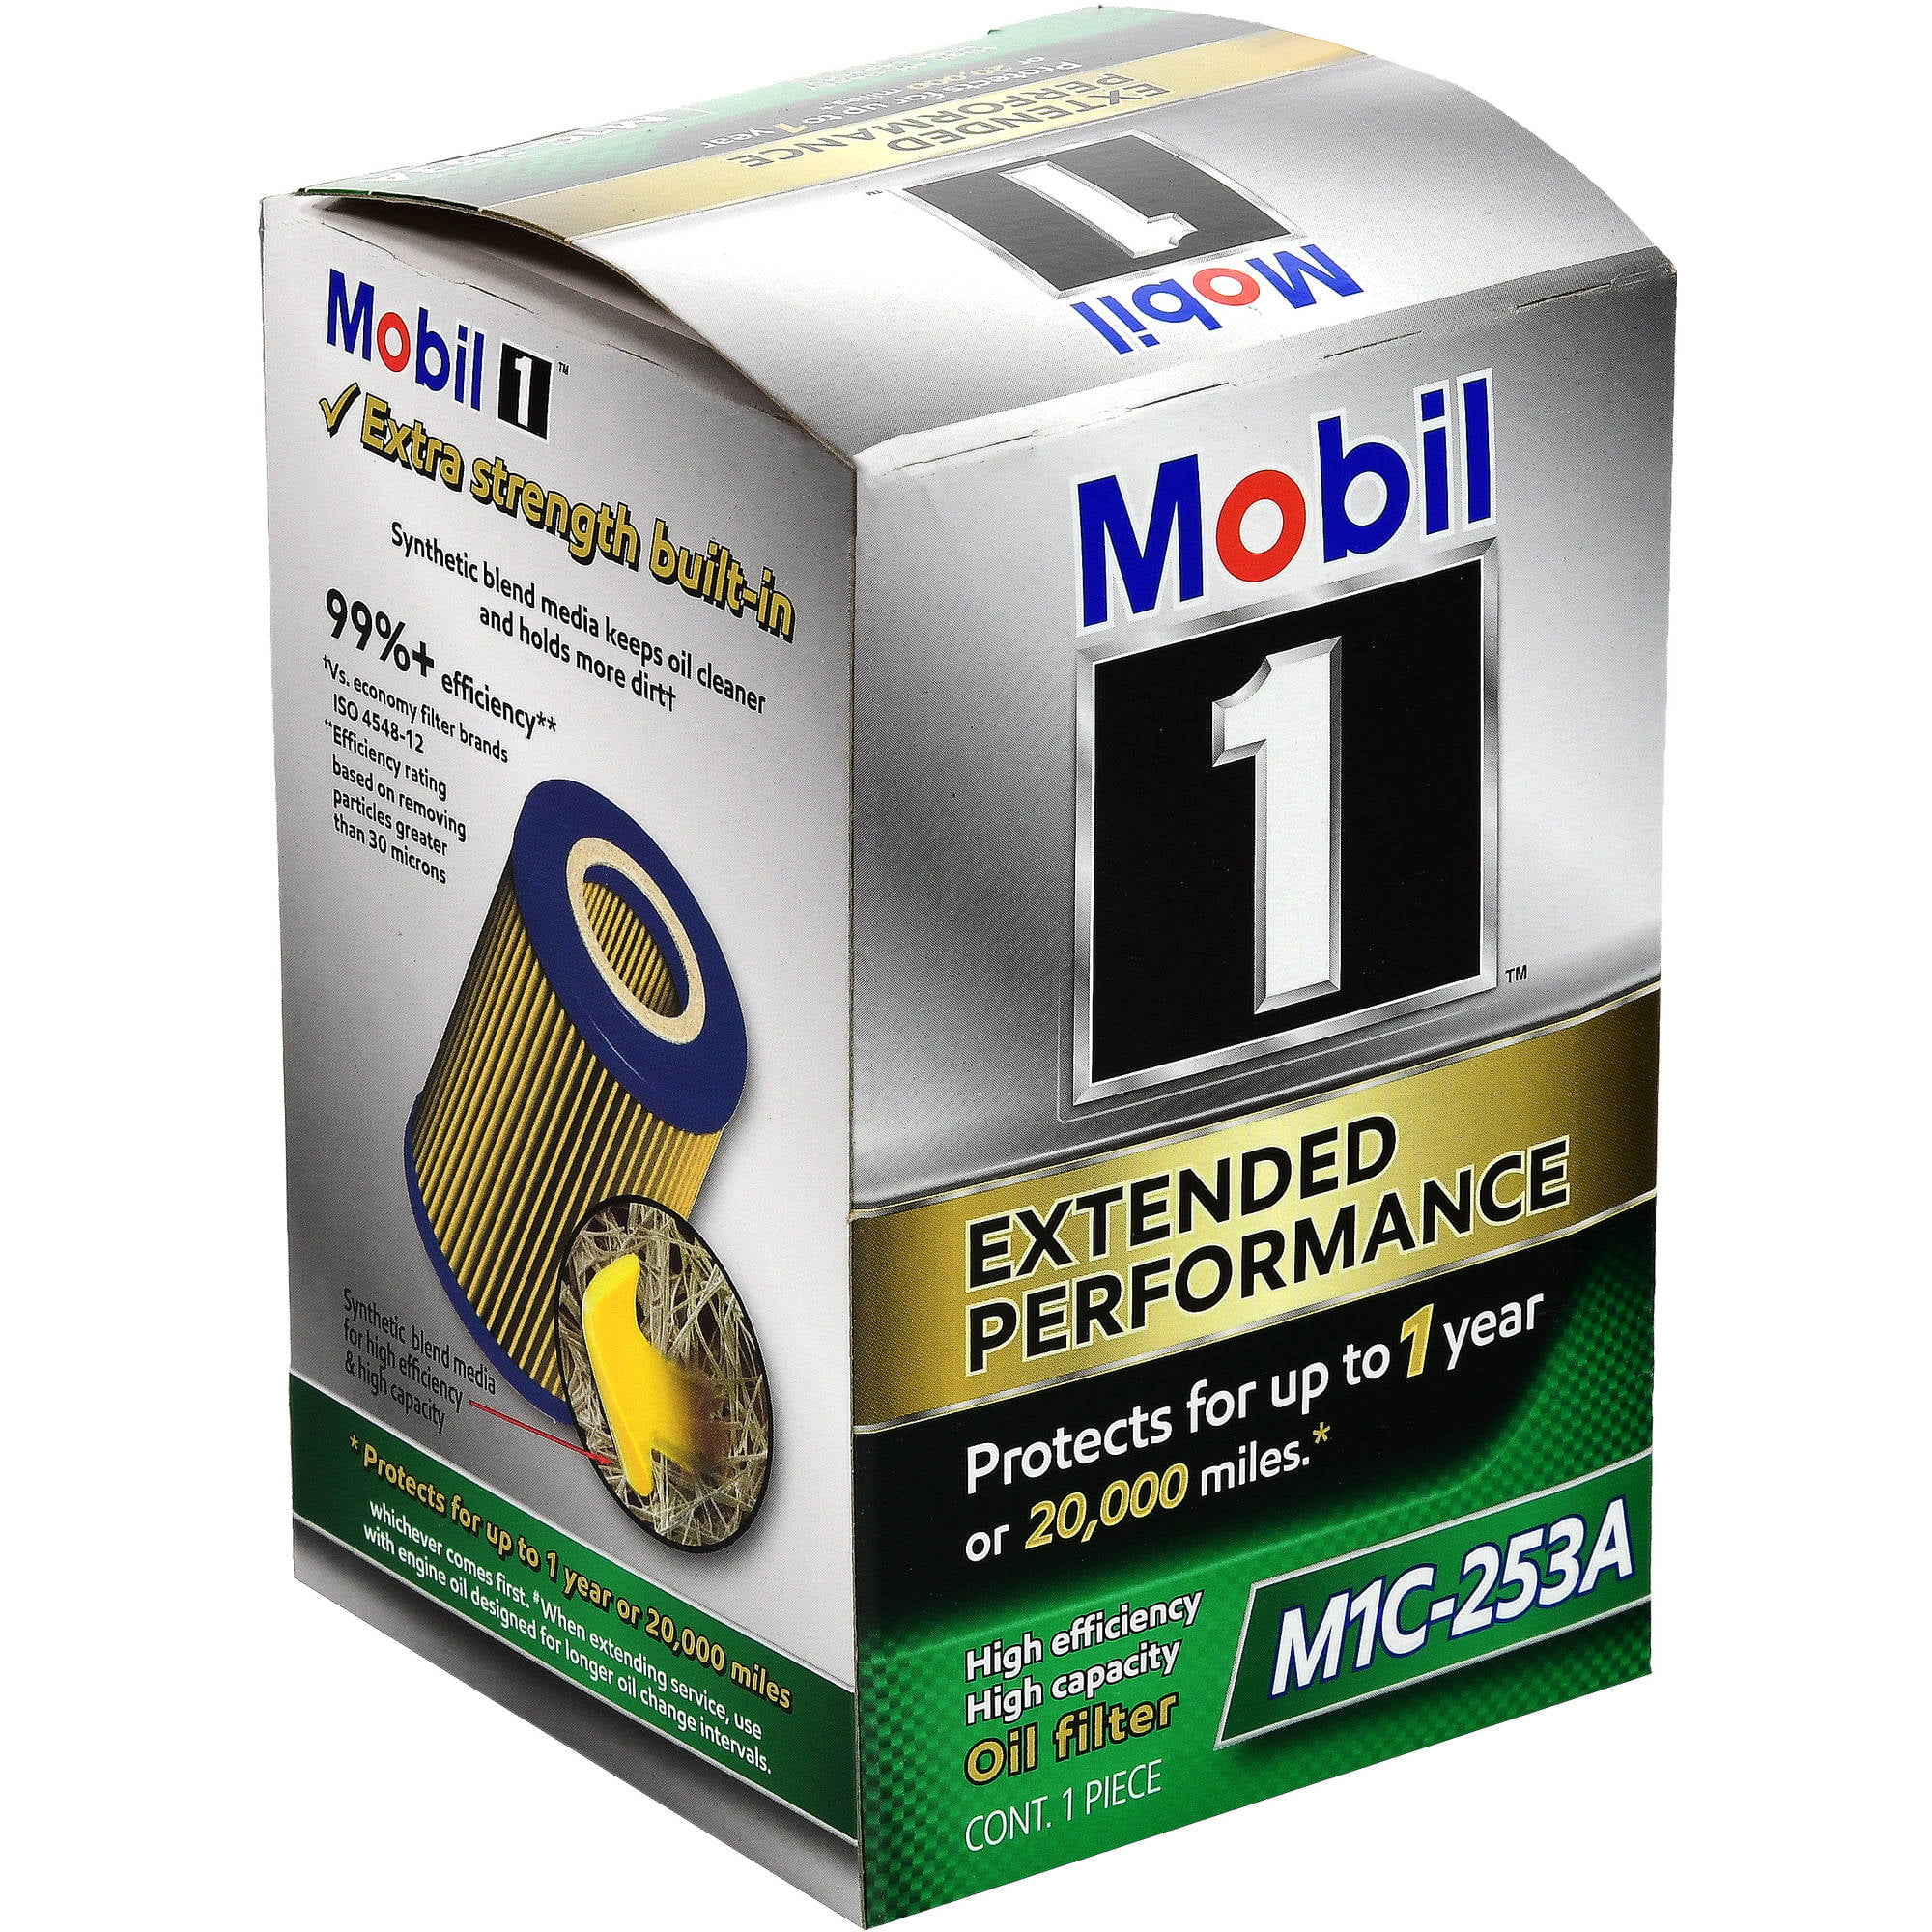 Are Mobil One Oil Filters Any Good